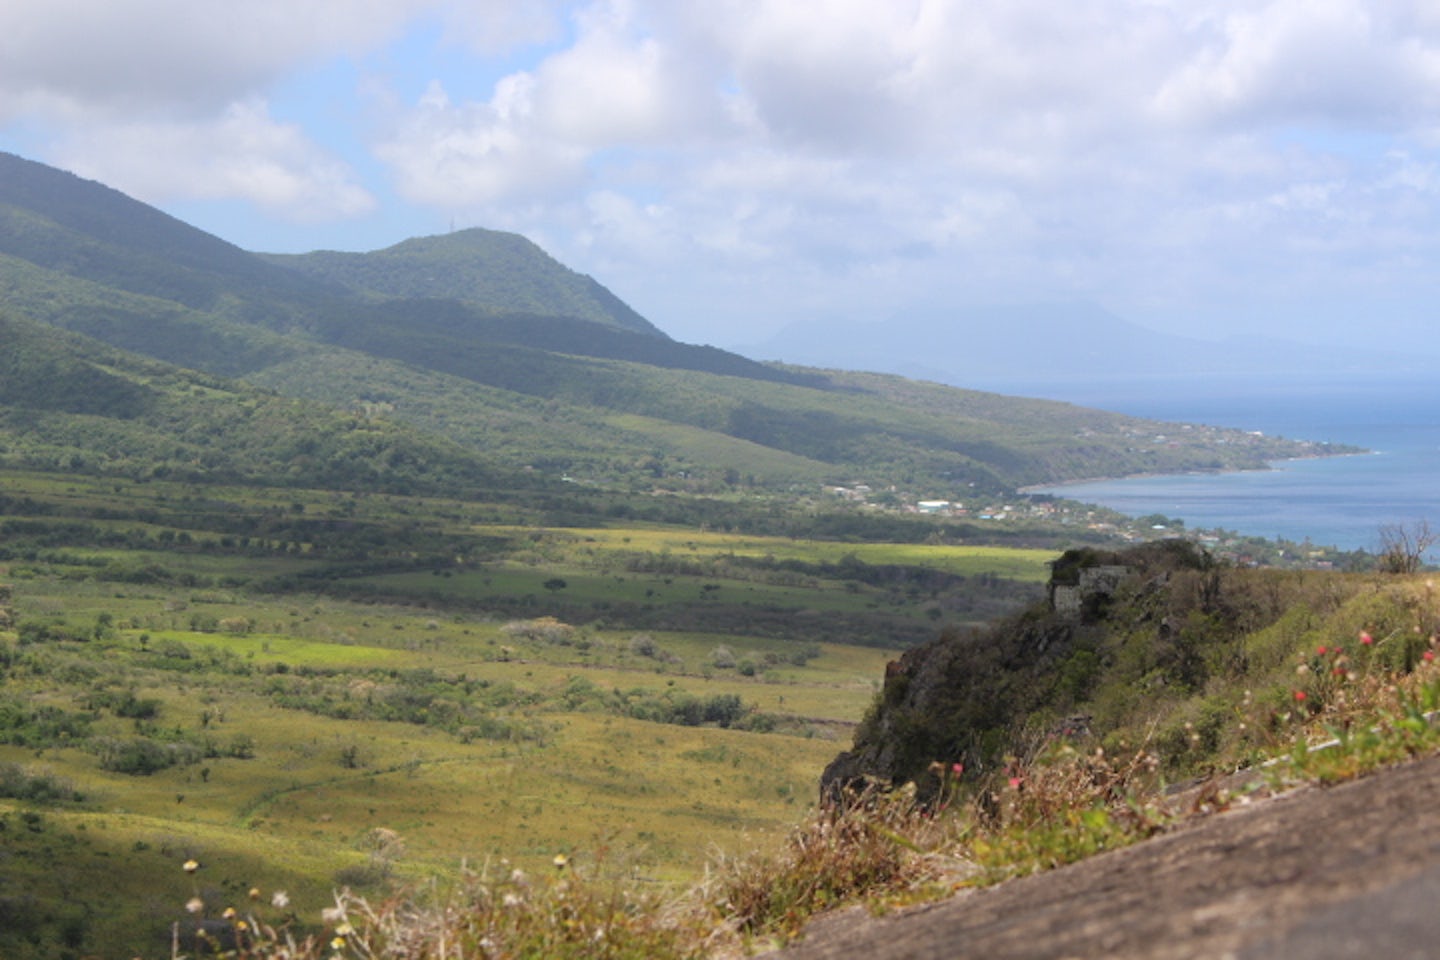 View from Brimstone Hill Fortress in St. Kitts